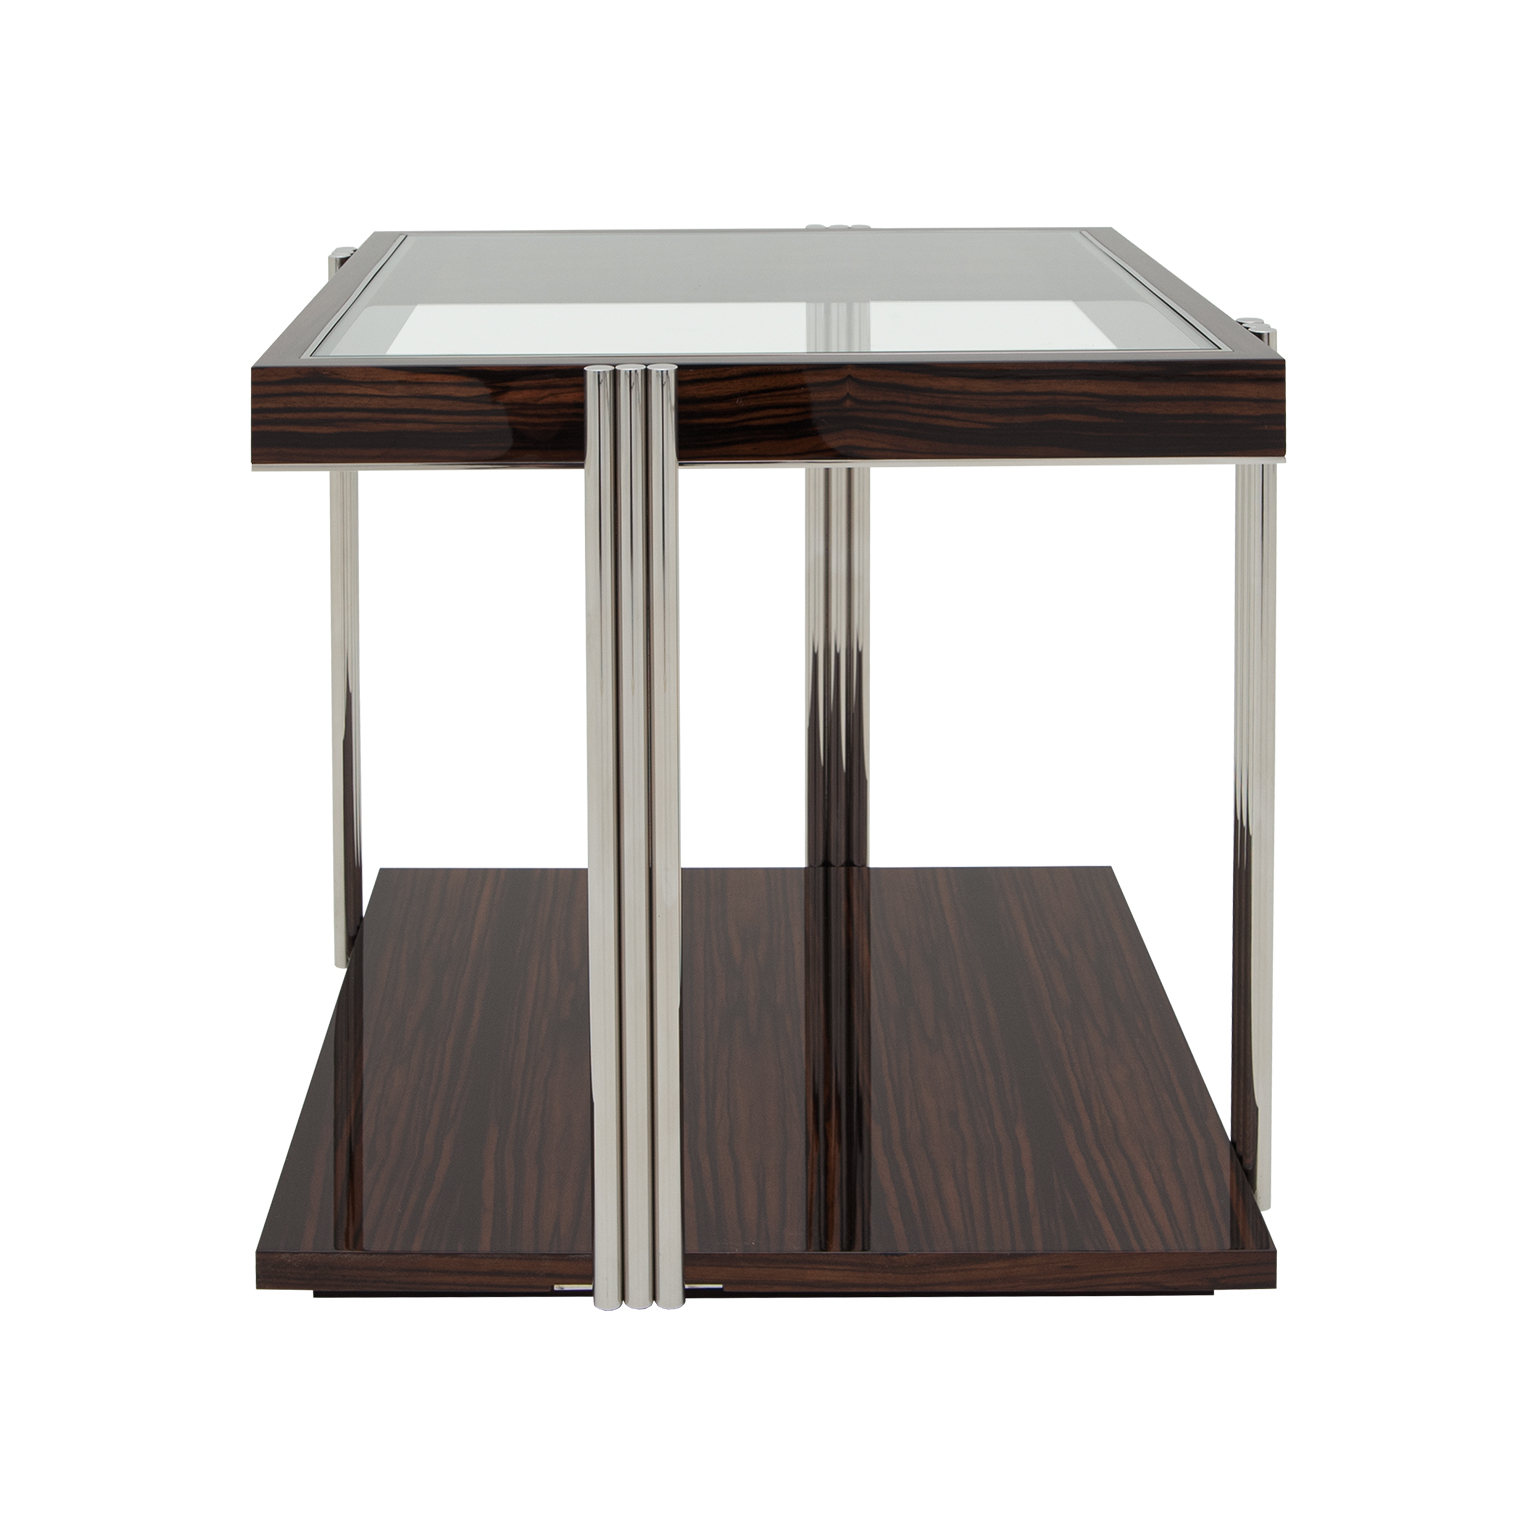 Macassar Ebony frame and base, top tier features glass with Macassar Ebony border, and legs are three rod design in polished stainless steel